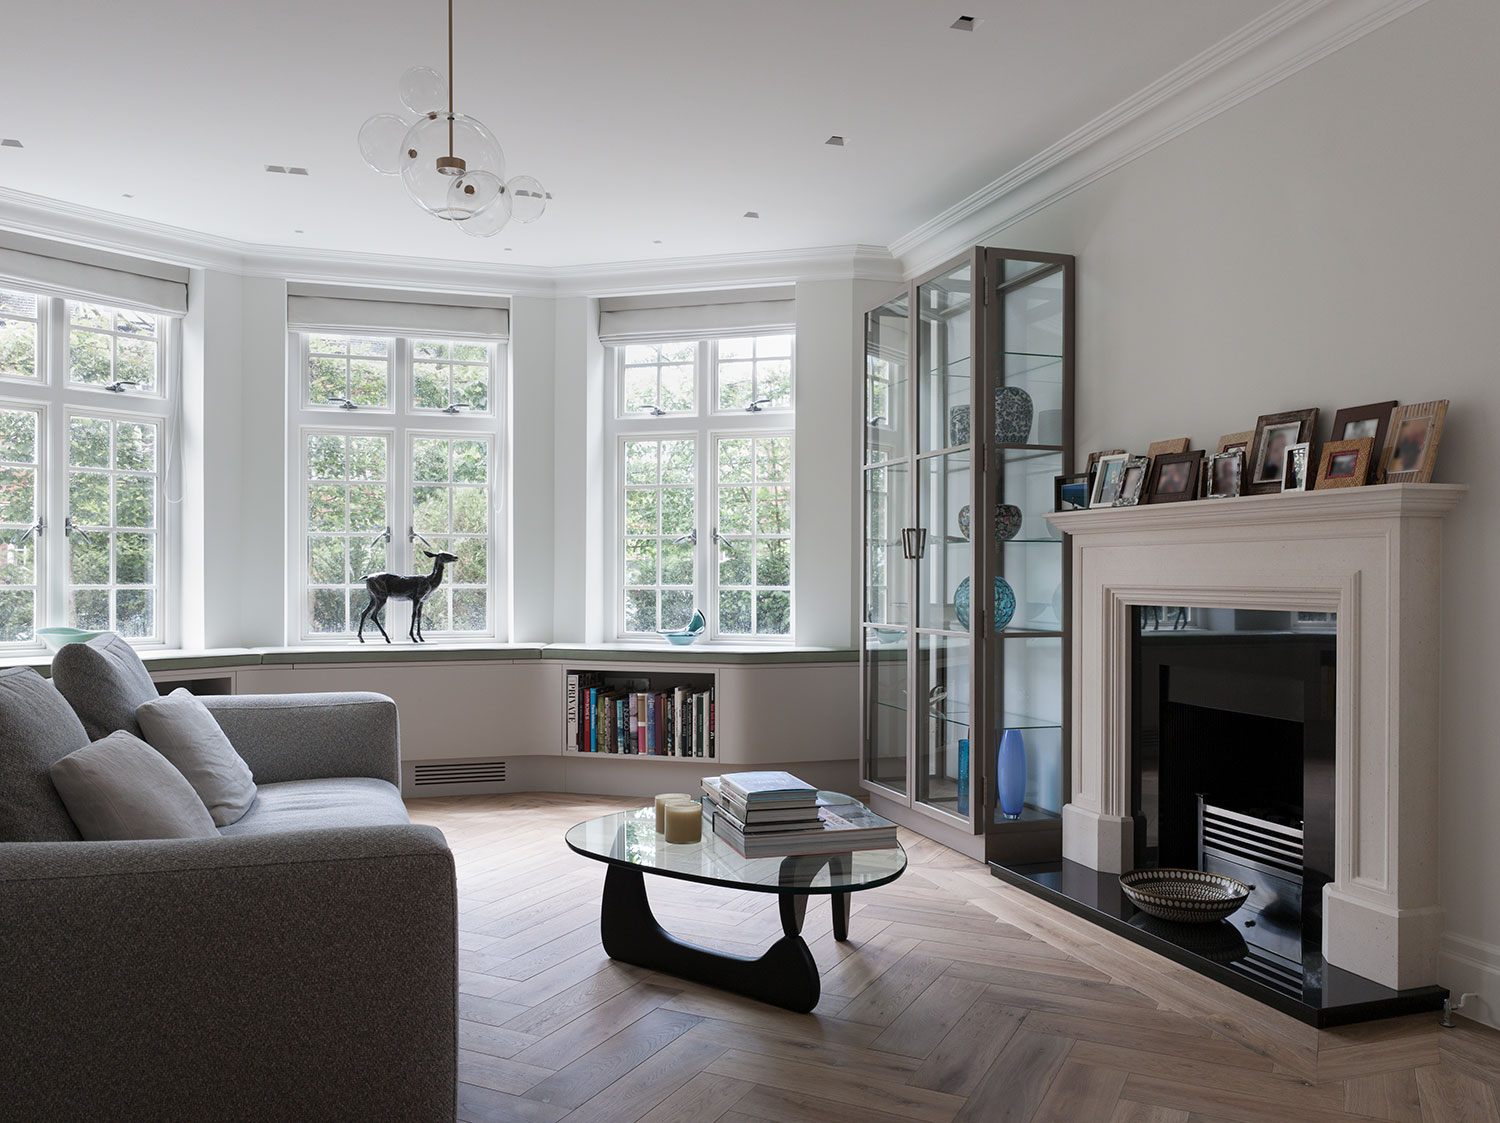 High end interior designed living space, London